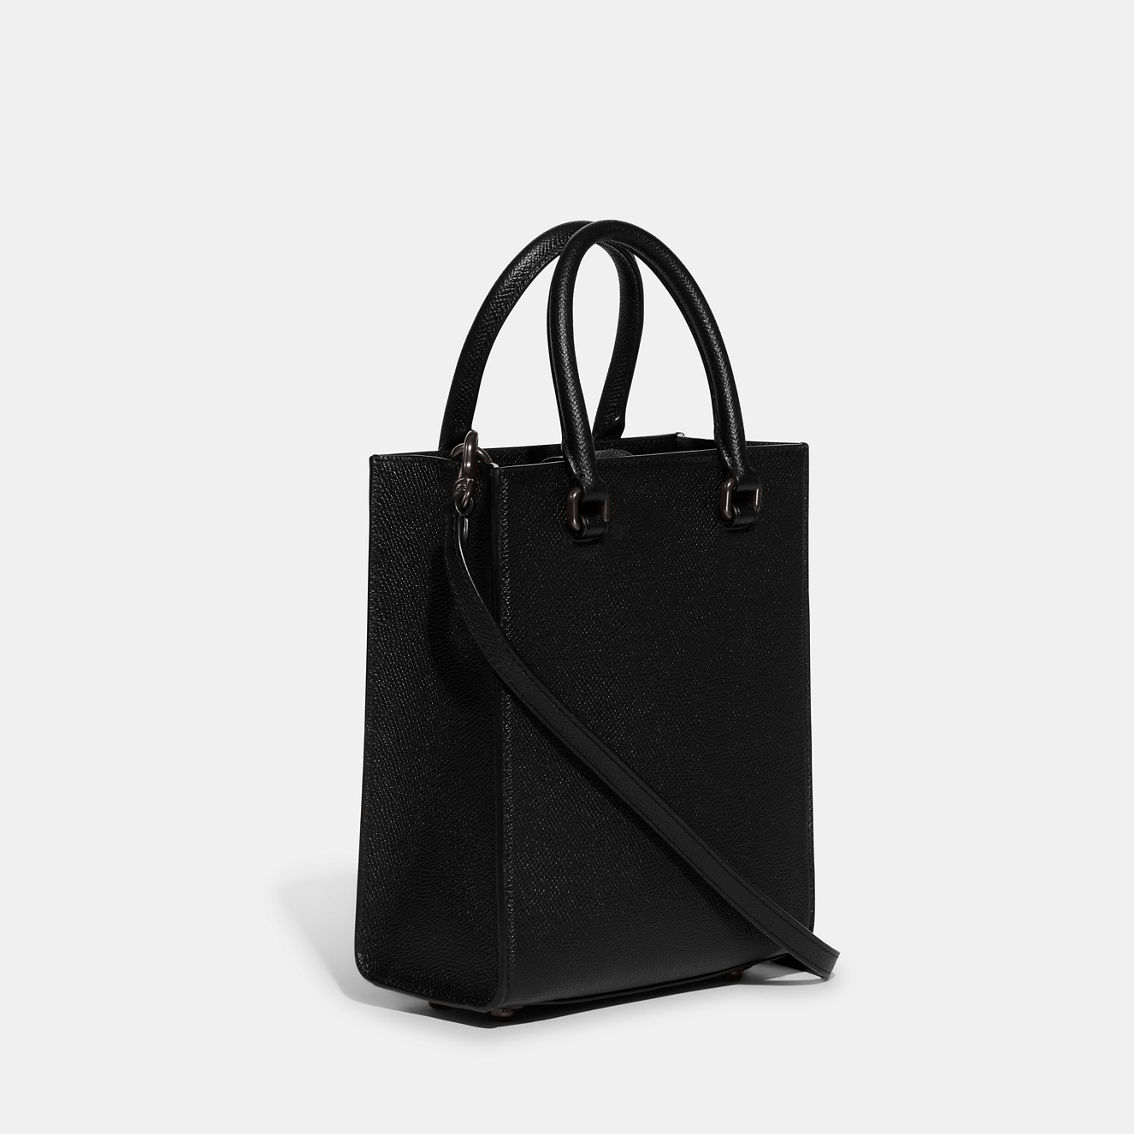 Coach Tote 16 In. Crossgrain Leather | Totes & Shoppers | Clothing ...